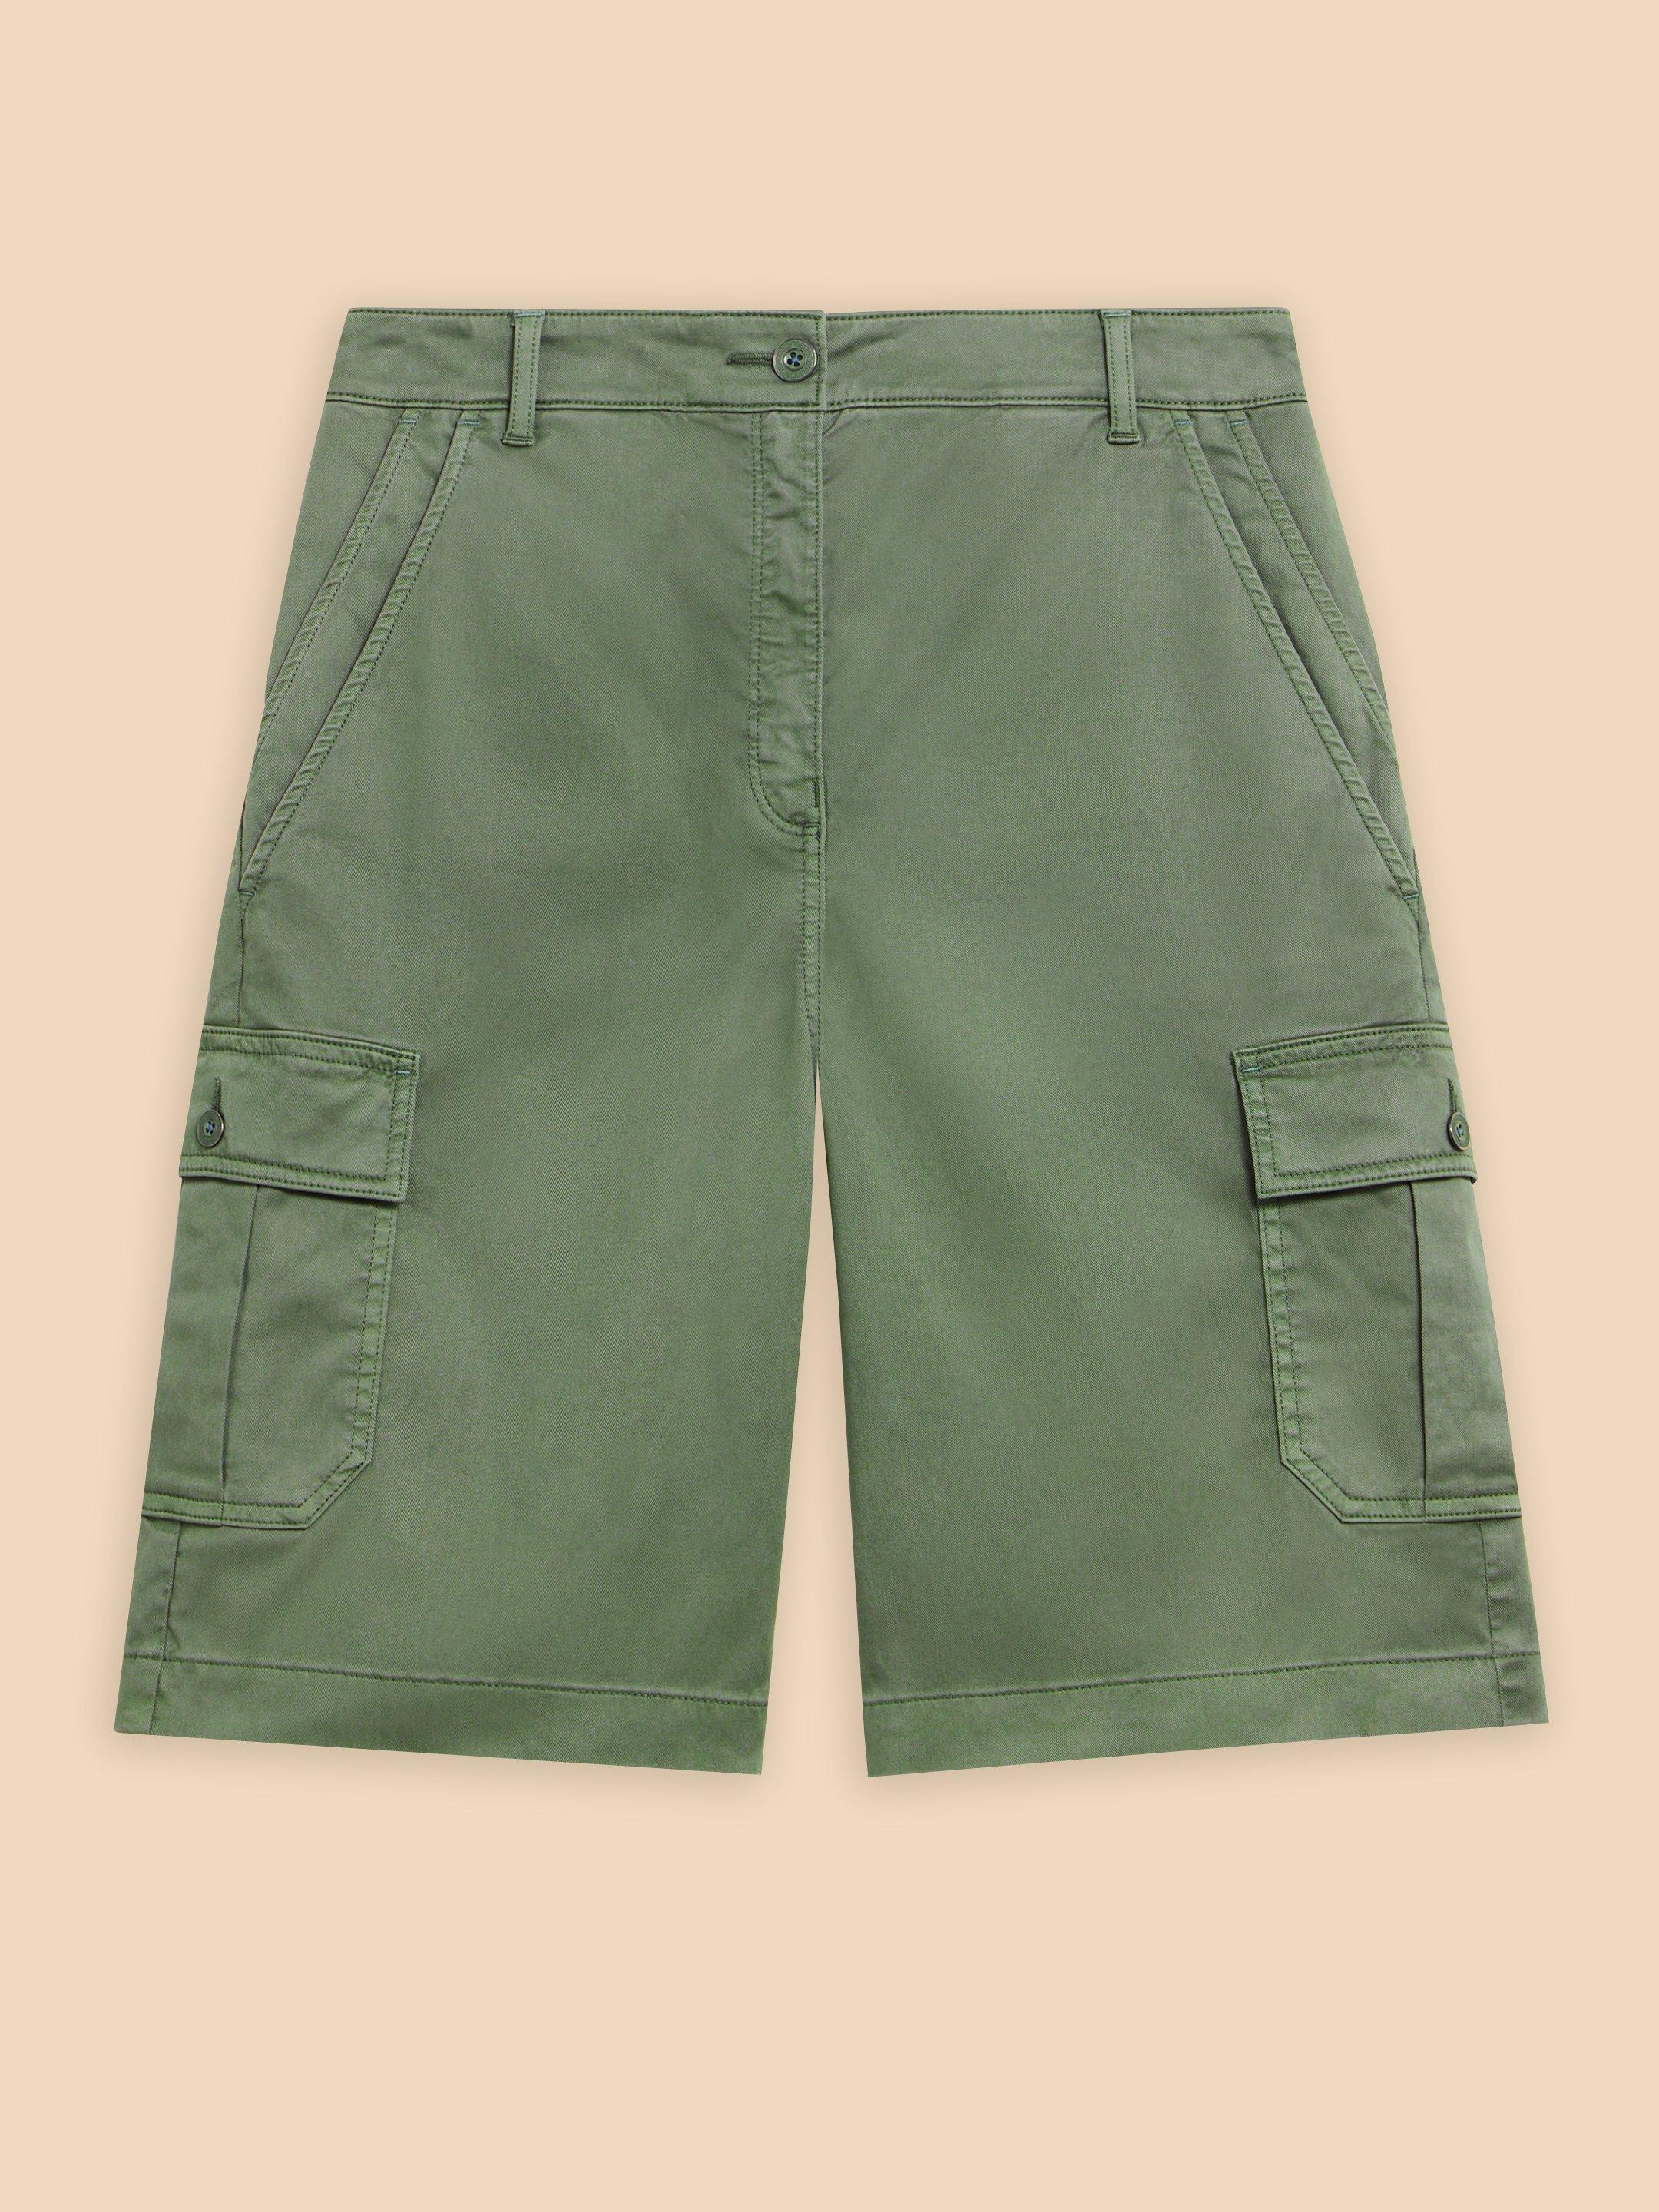 Everleigh Cargo Shorts in MID GREEN - FLAT FRONT